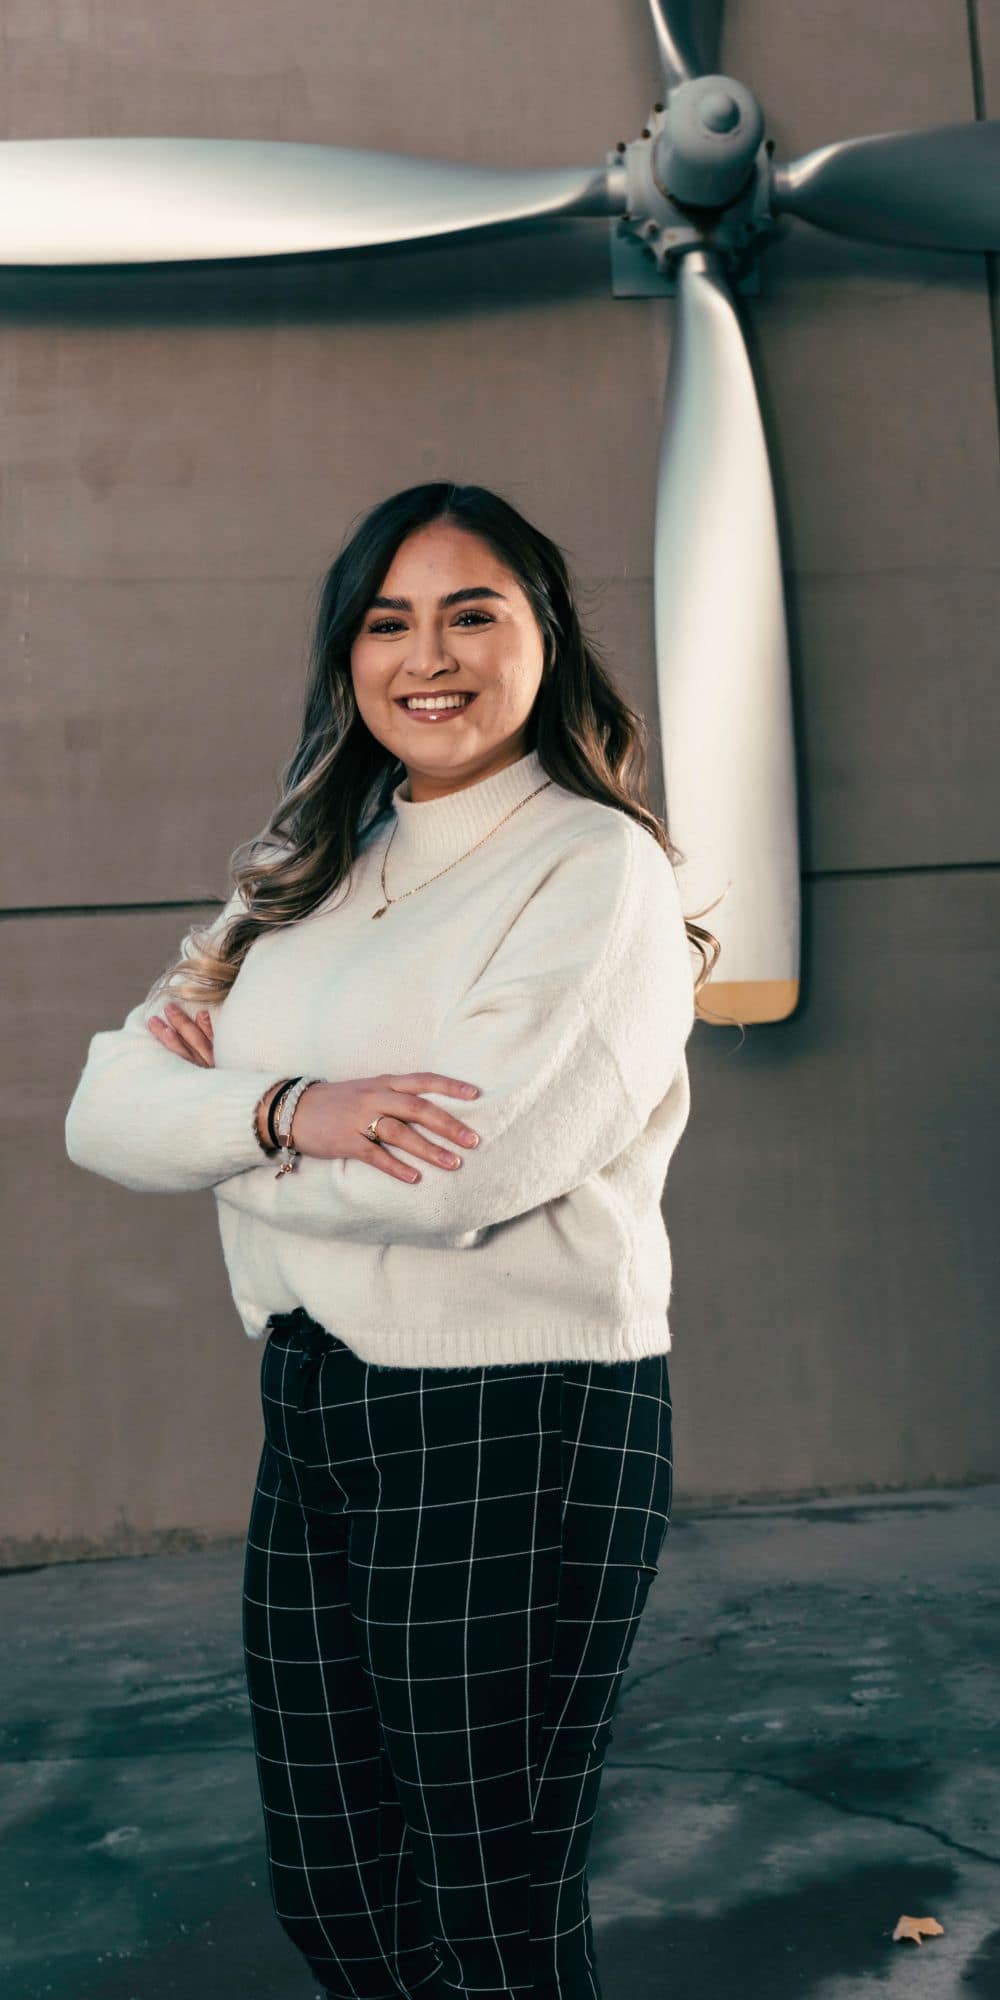 Letsy Gonzalez ('23) is prepared to graduate with a B.S. in Software Engineering in the spring before beginning her career with Northrop Grumman as a Modeling, Simulation and Analysis Engineer. (Photo: Embry-Riddle / Connor McShane)